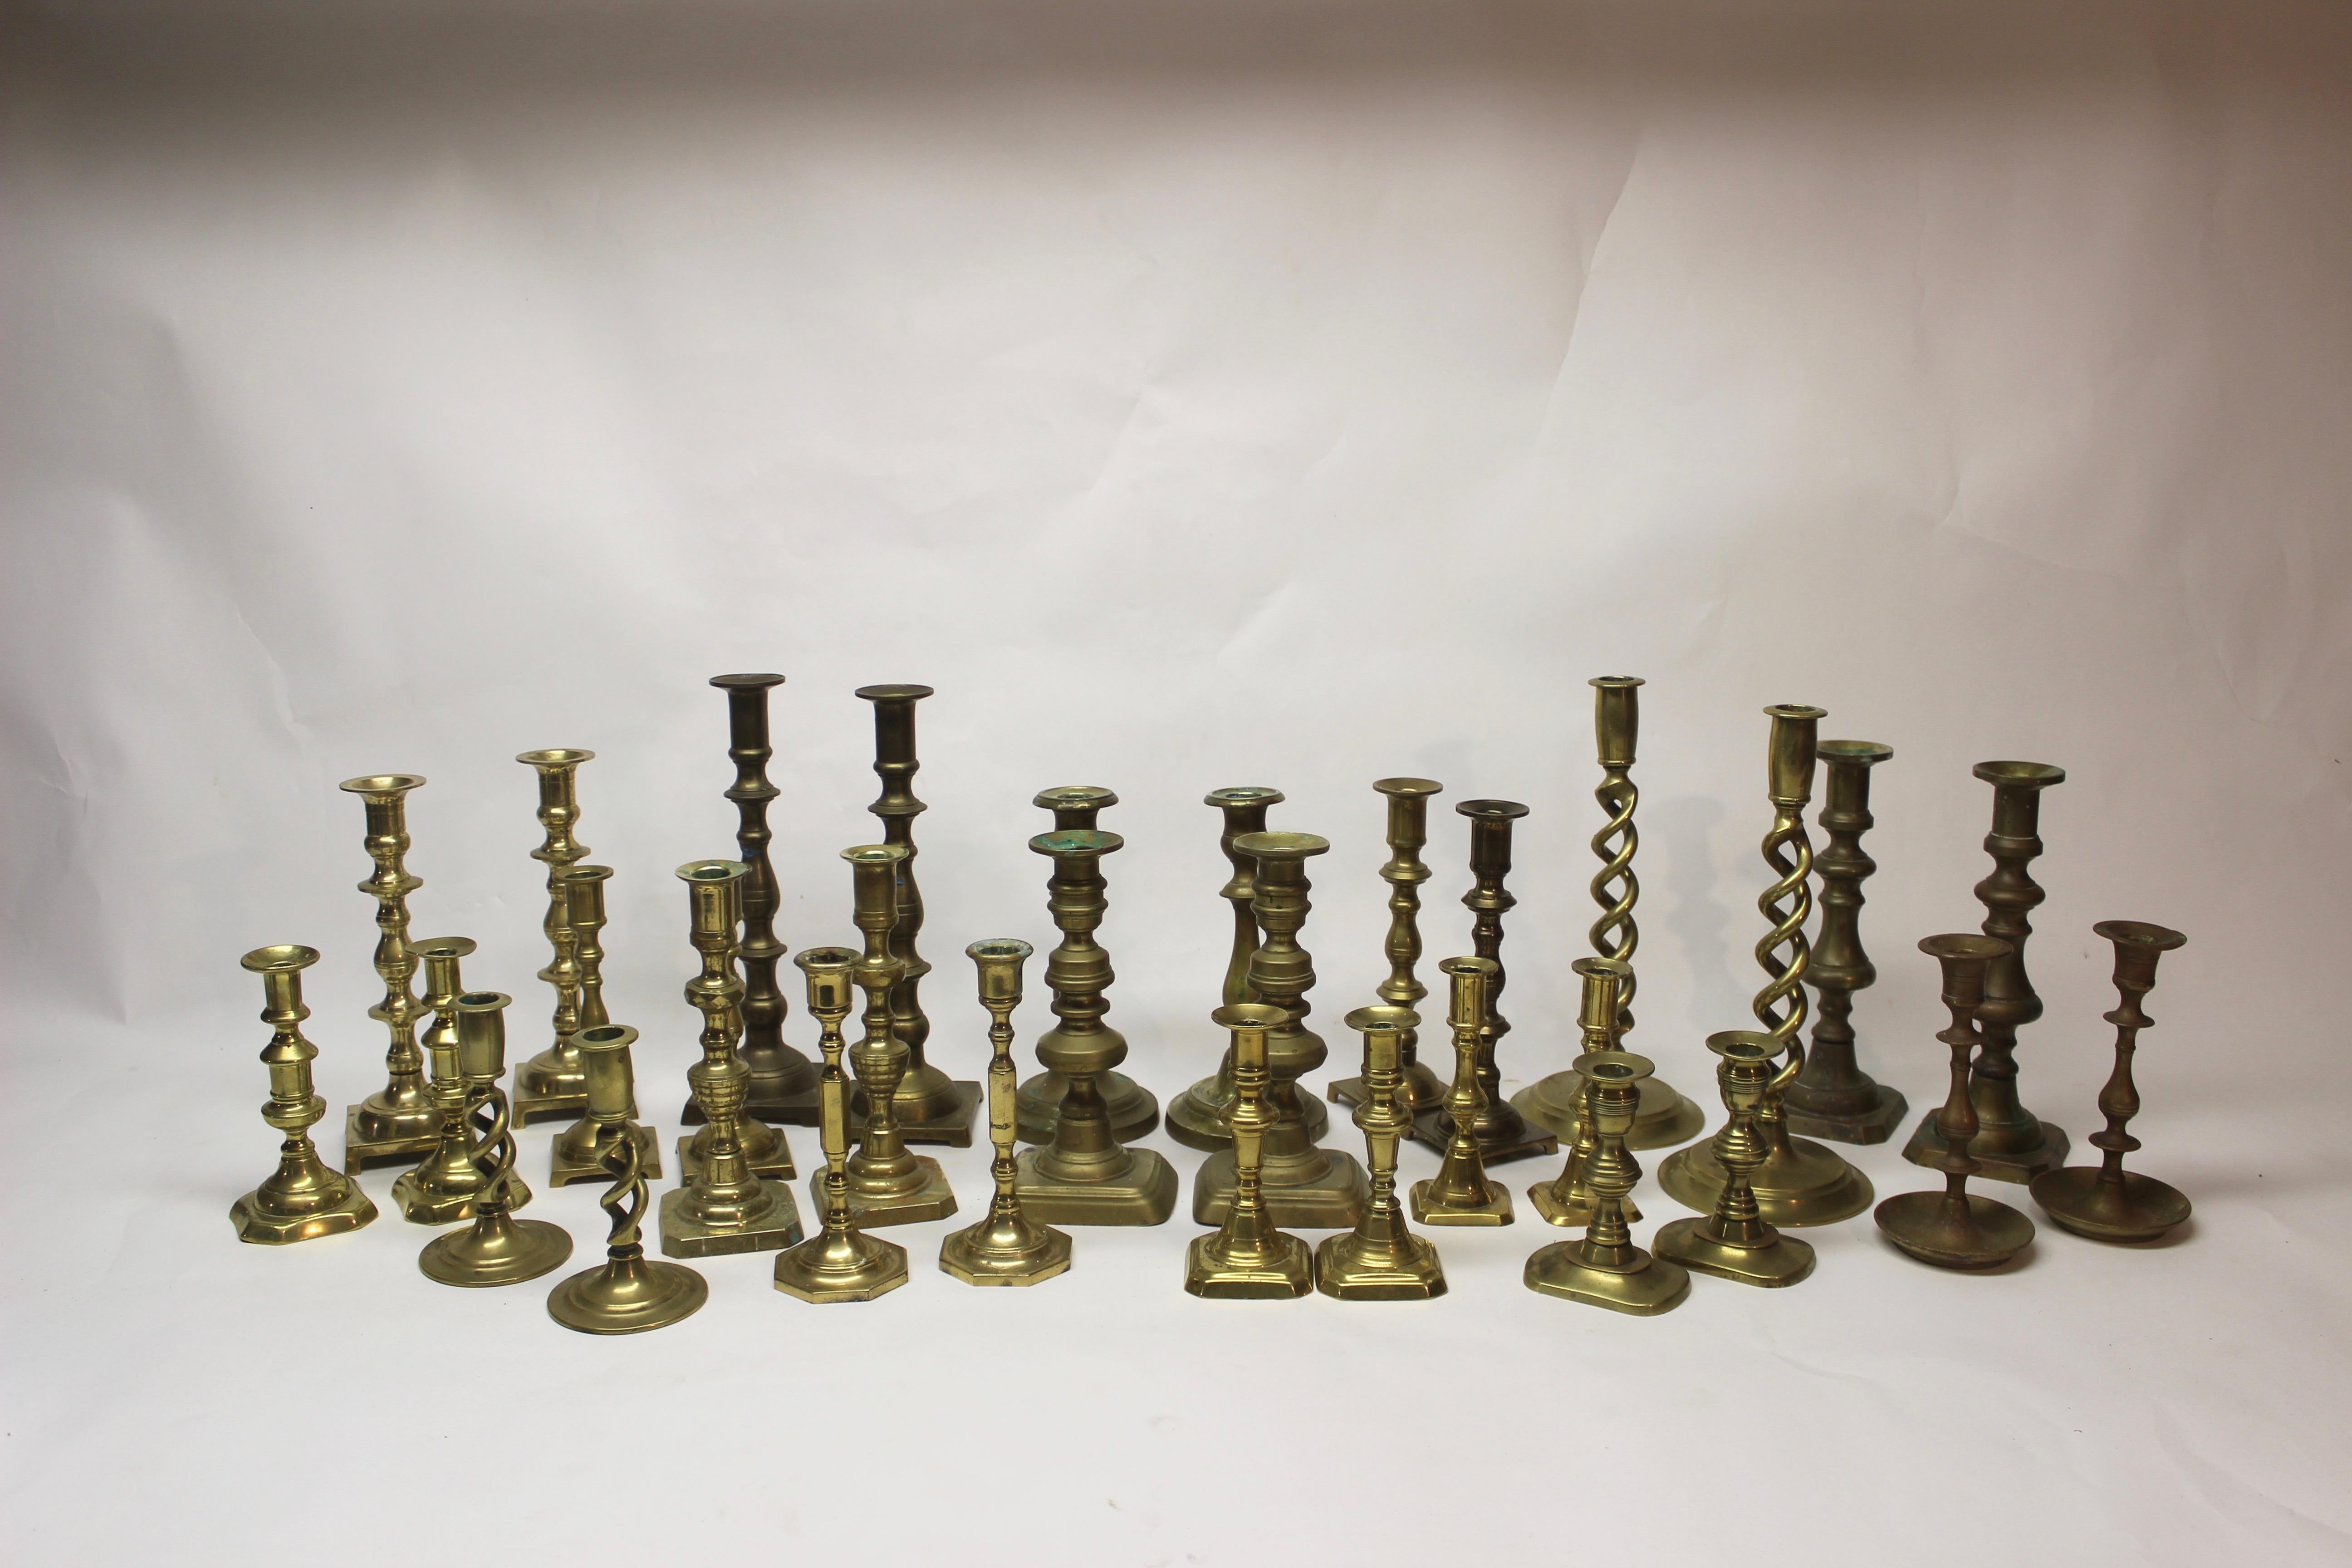 16 pairs of vintage and antique brass candlesticks

Measures: Tallest 12